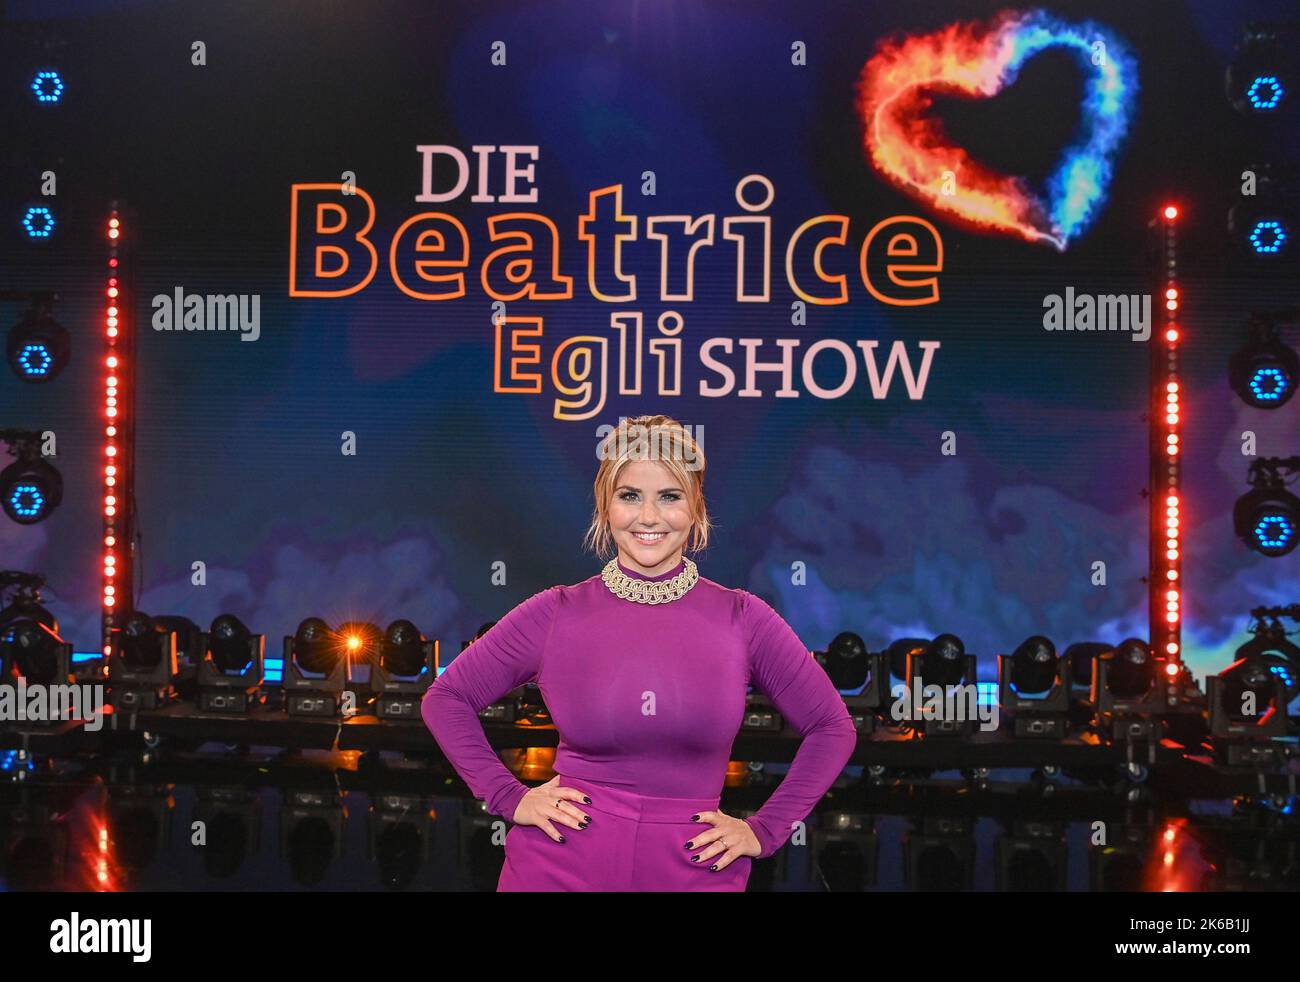 Berlin, Germany. 11th Oct, 2022. The singer and presenter Beatrice Egli is on stage after the recording of the 'Beatrice Egli Show' in Berlin-Adlershof. The show can be seen on November 26, 2022. SWR television, MDR television and Swiss television SRF are involved. Credit: Jens Kalaene/dpa/Alamy Live News Stock Photo